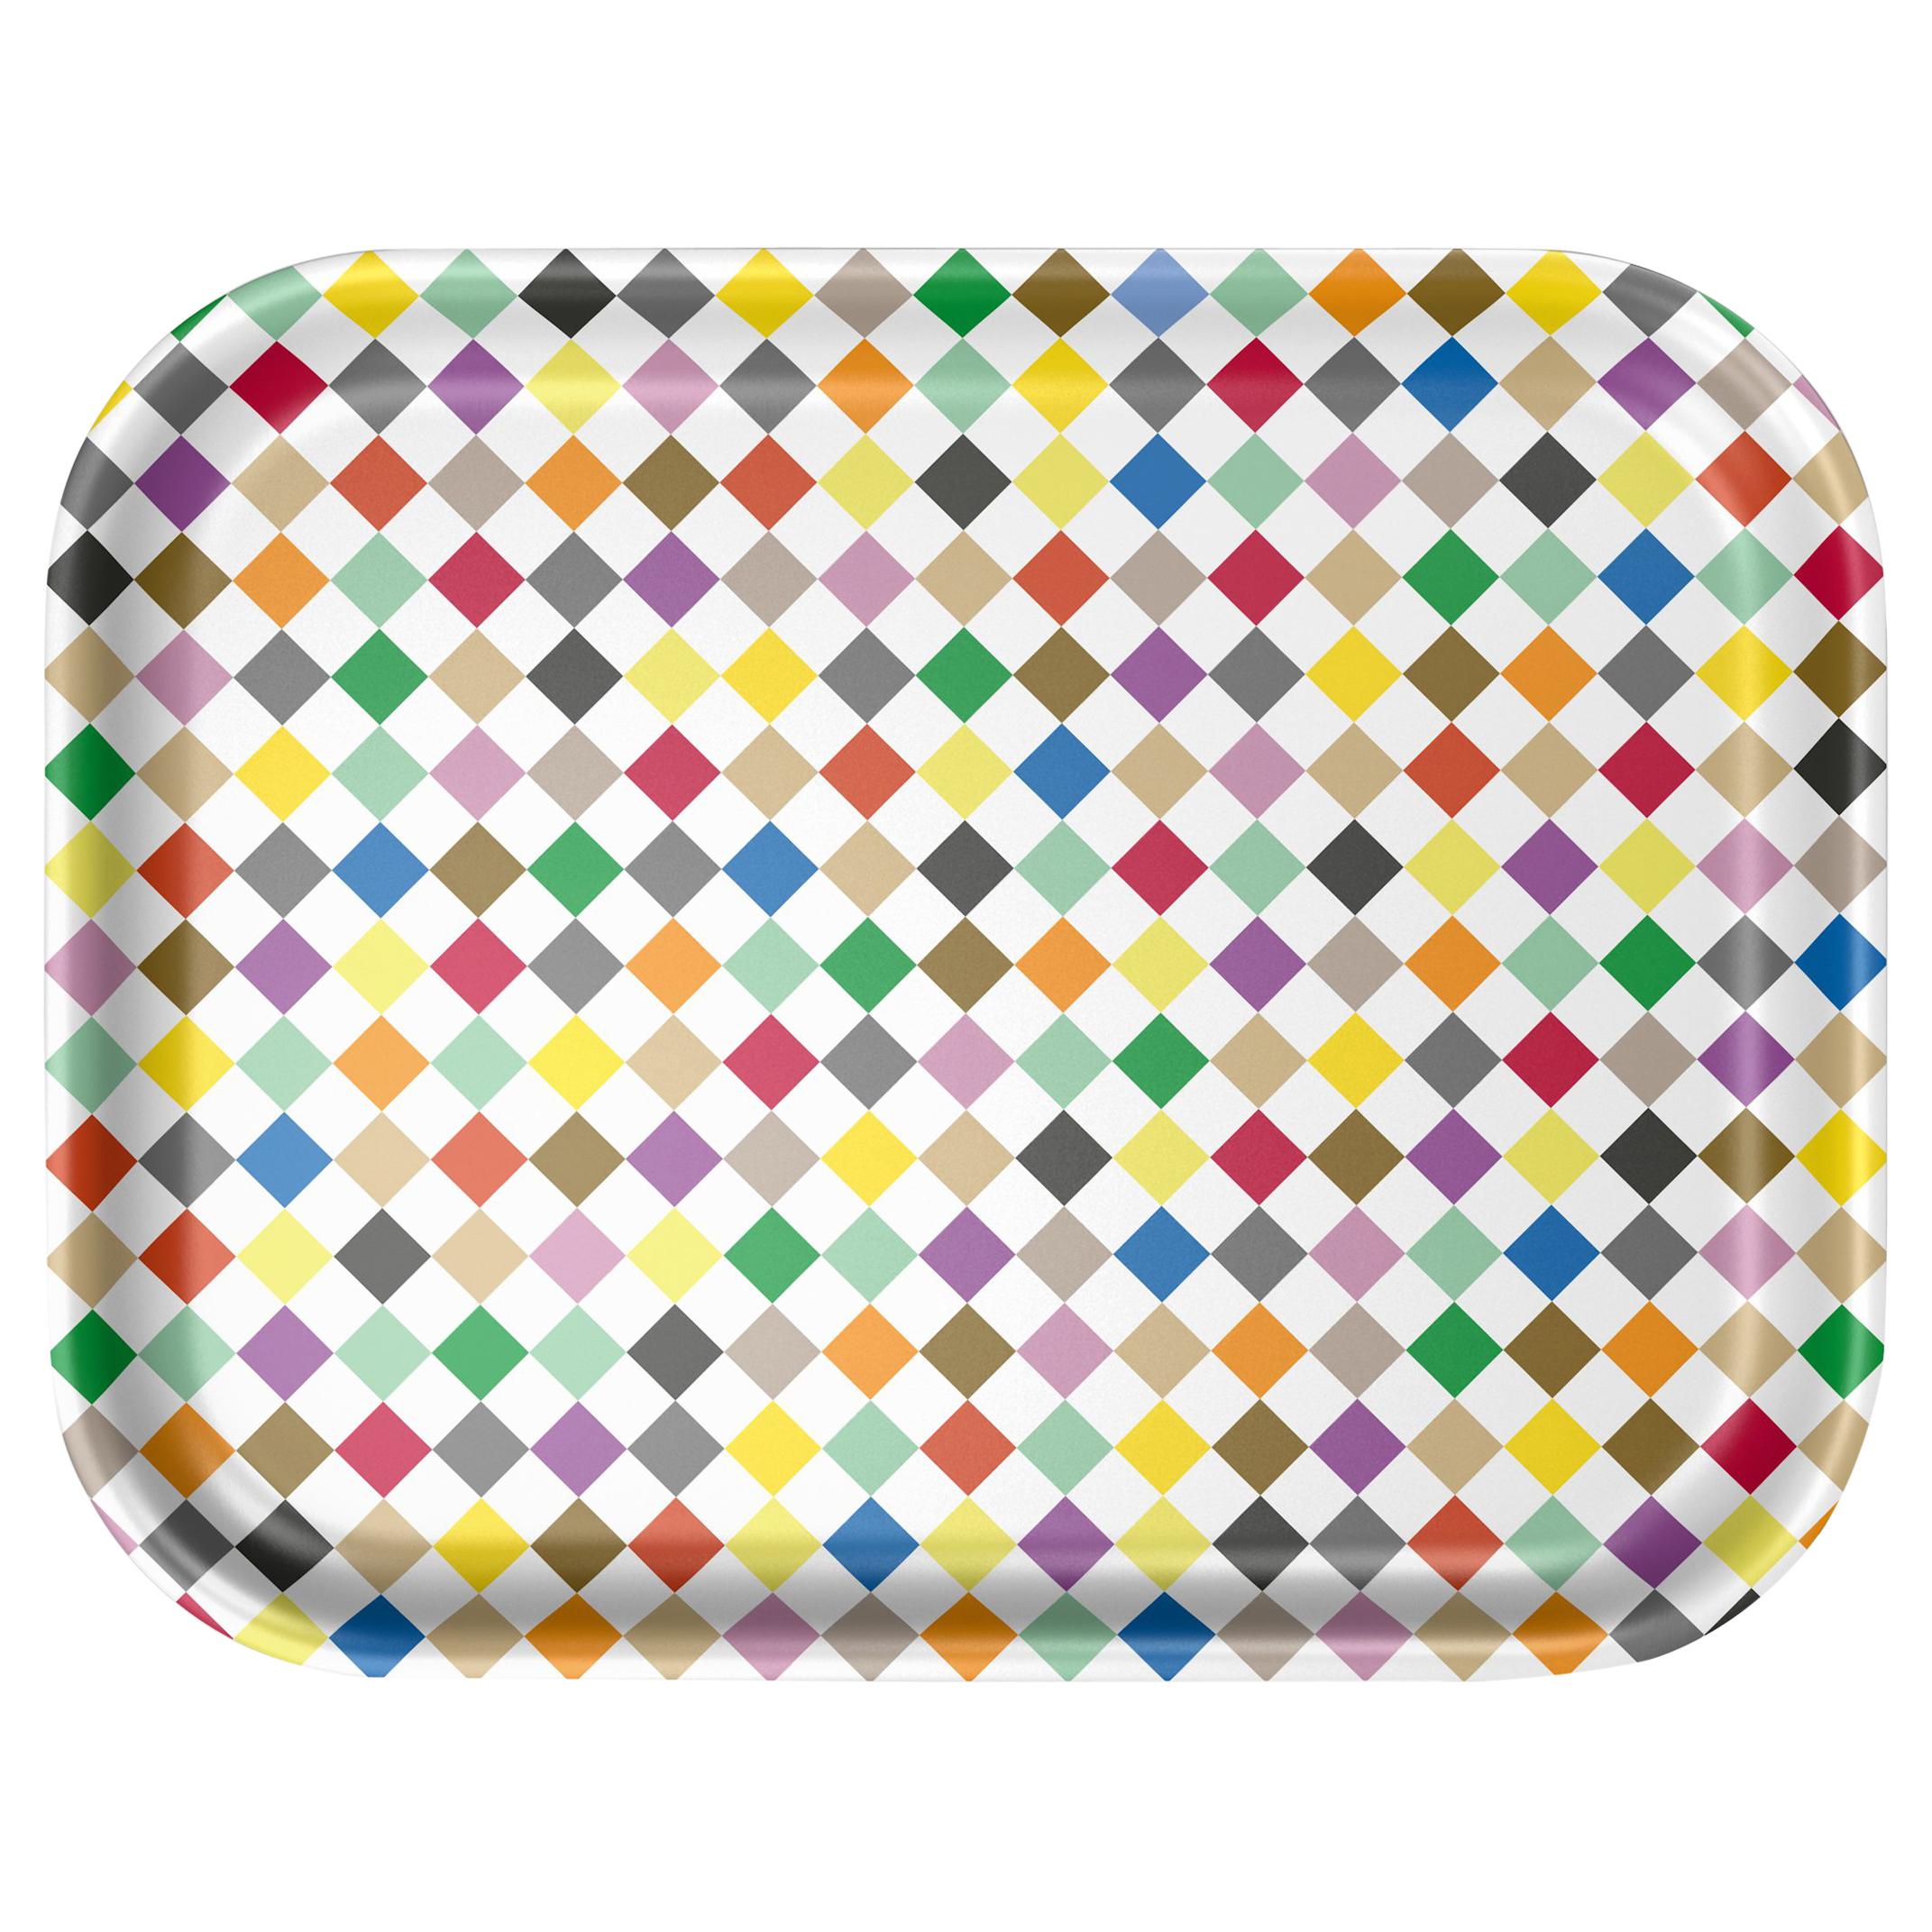 Vitra Medium Classic Tray in Multicolor Diamond Pattern by Alexander Girard For Sale